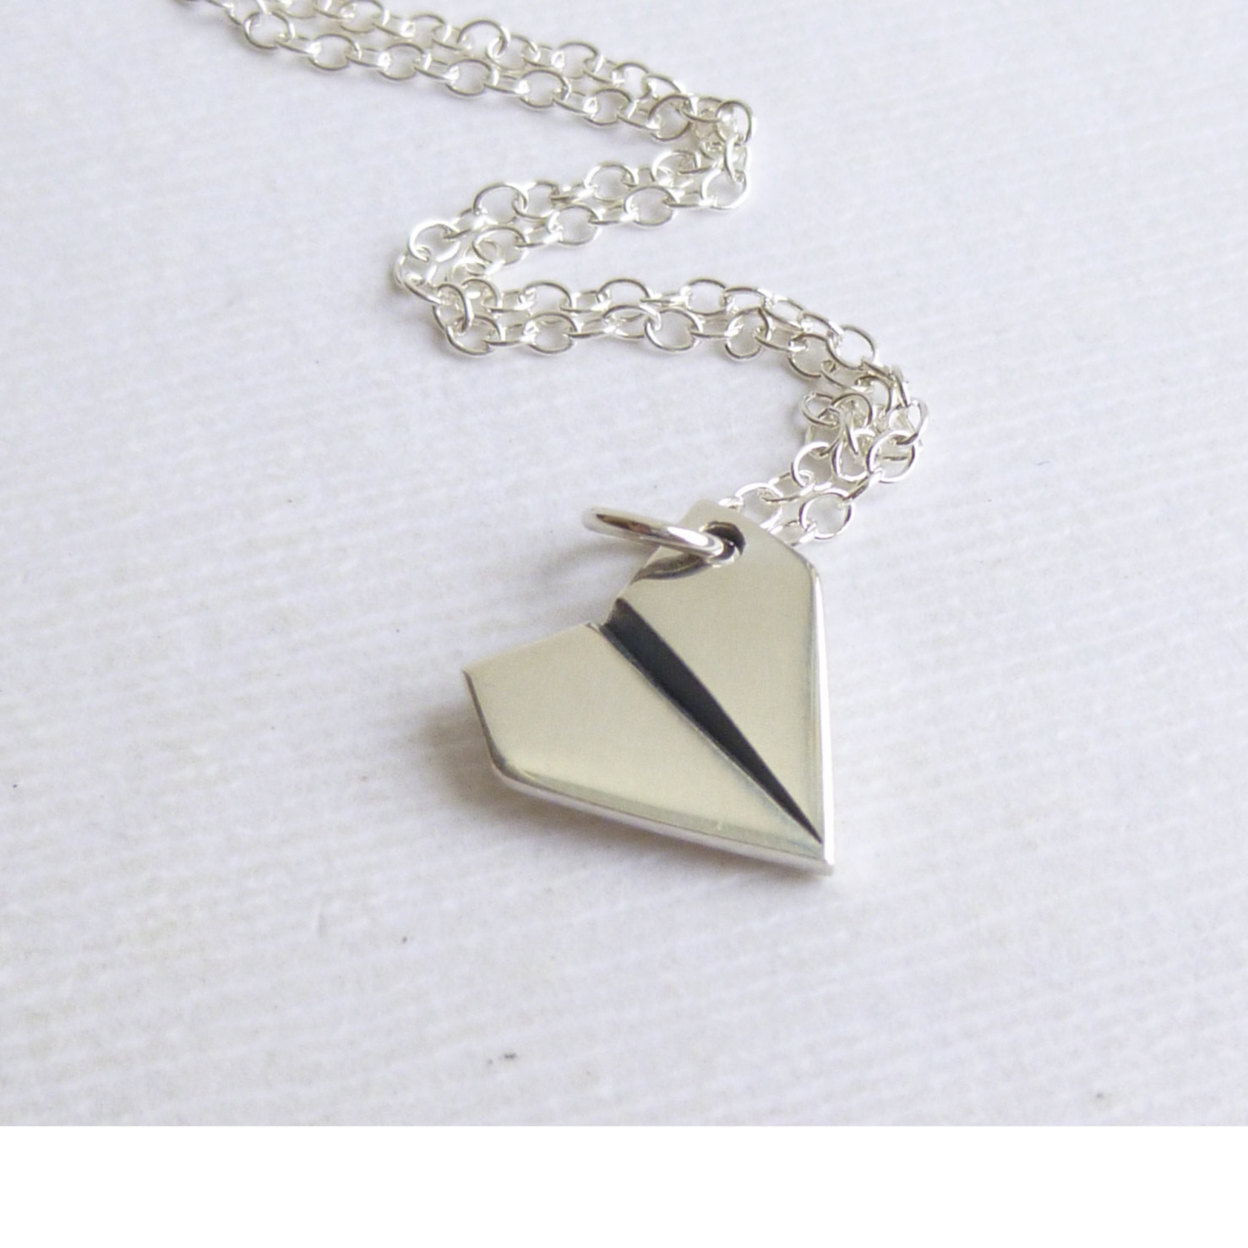 Buy Sterling Silver Paper Airplane Necklace by Kinderdoodles LLC on OpenSky